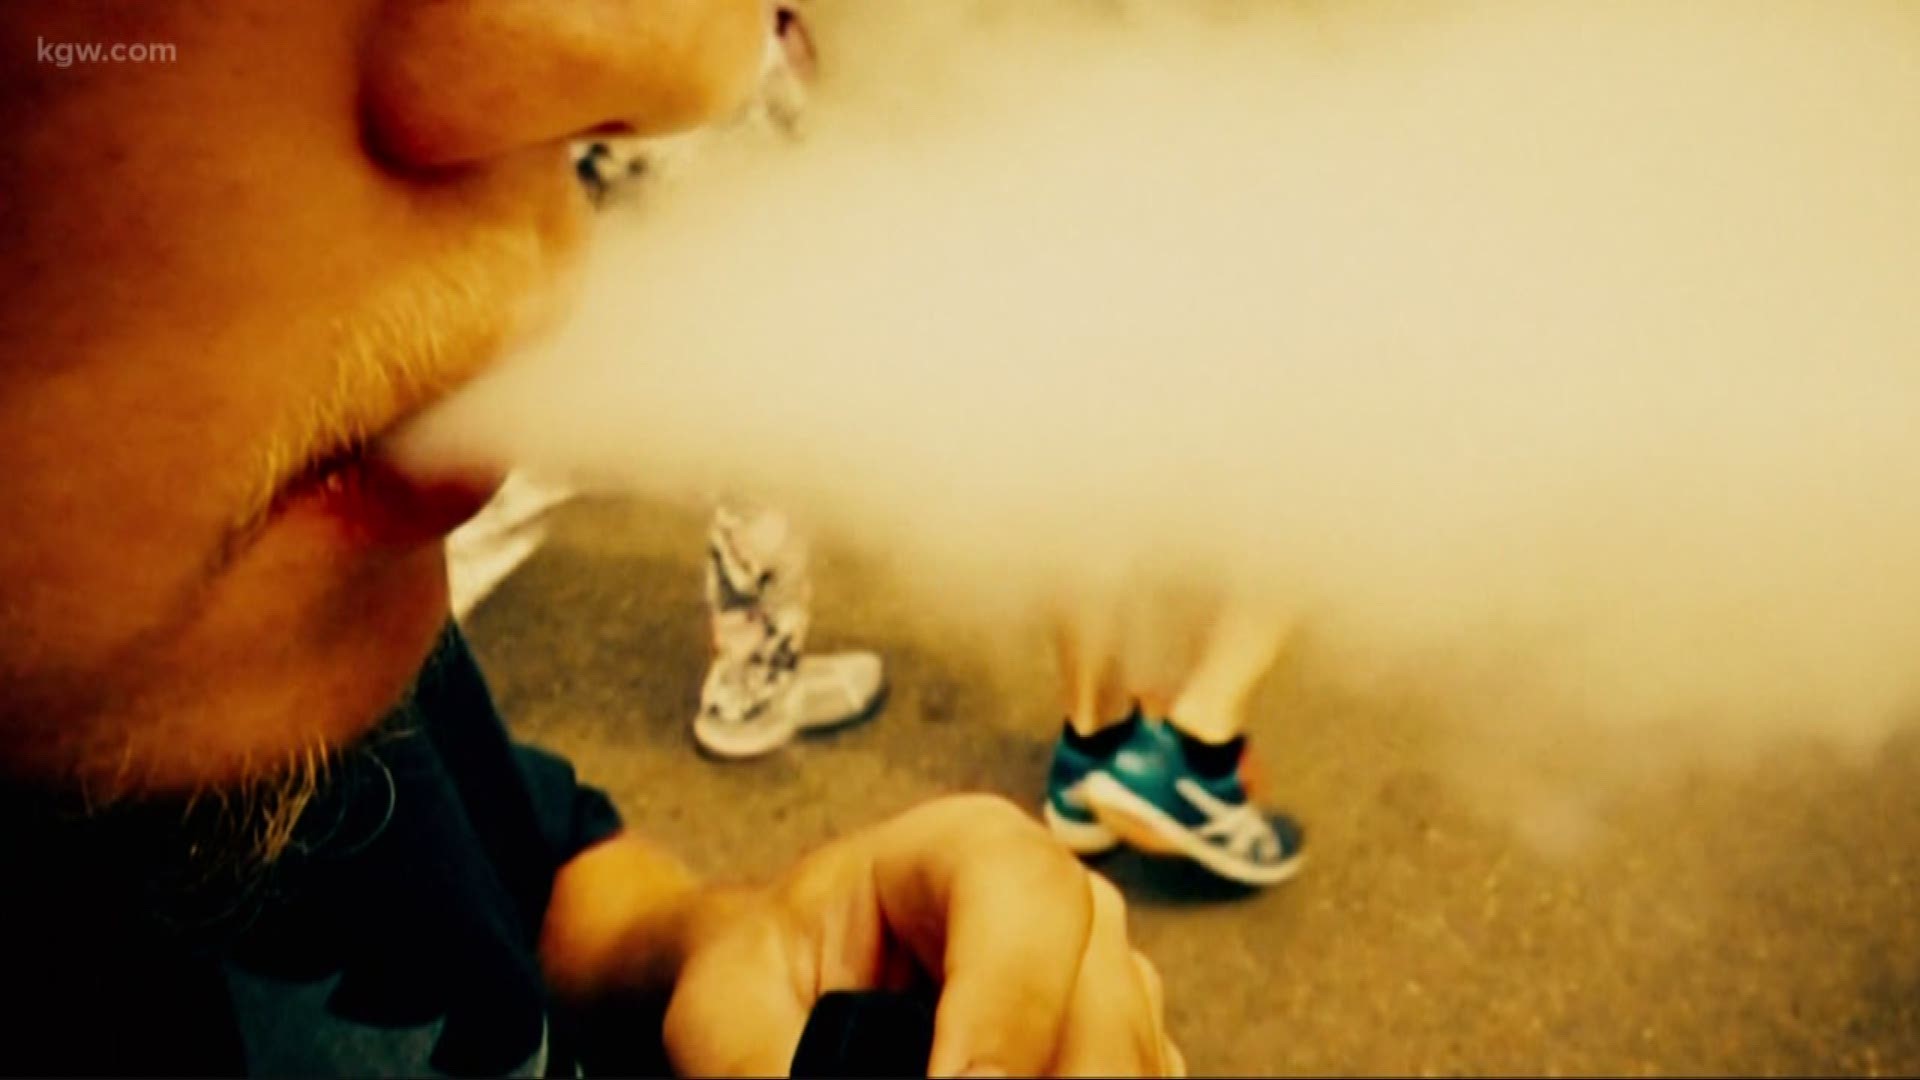 The latest on the outbreak of illnesses linked to vaping.